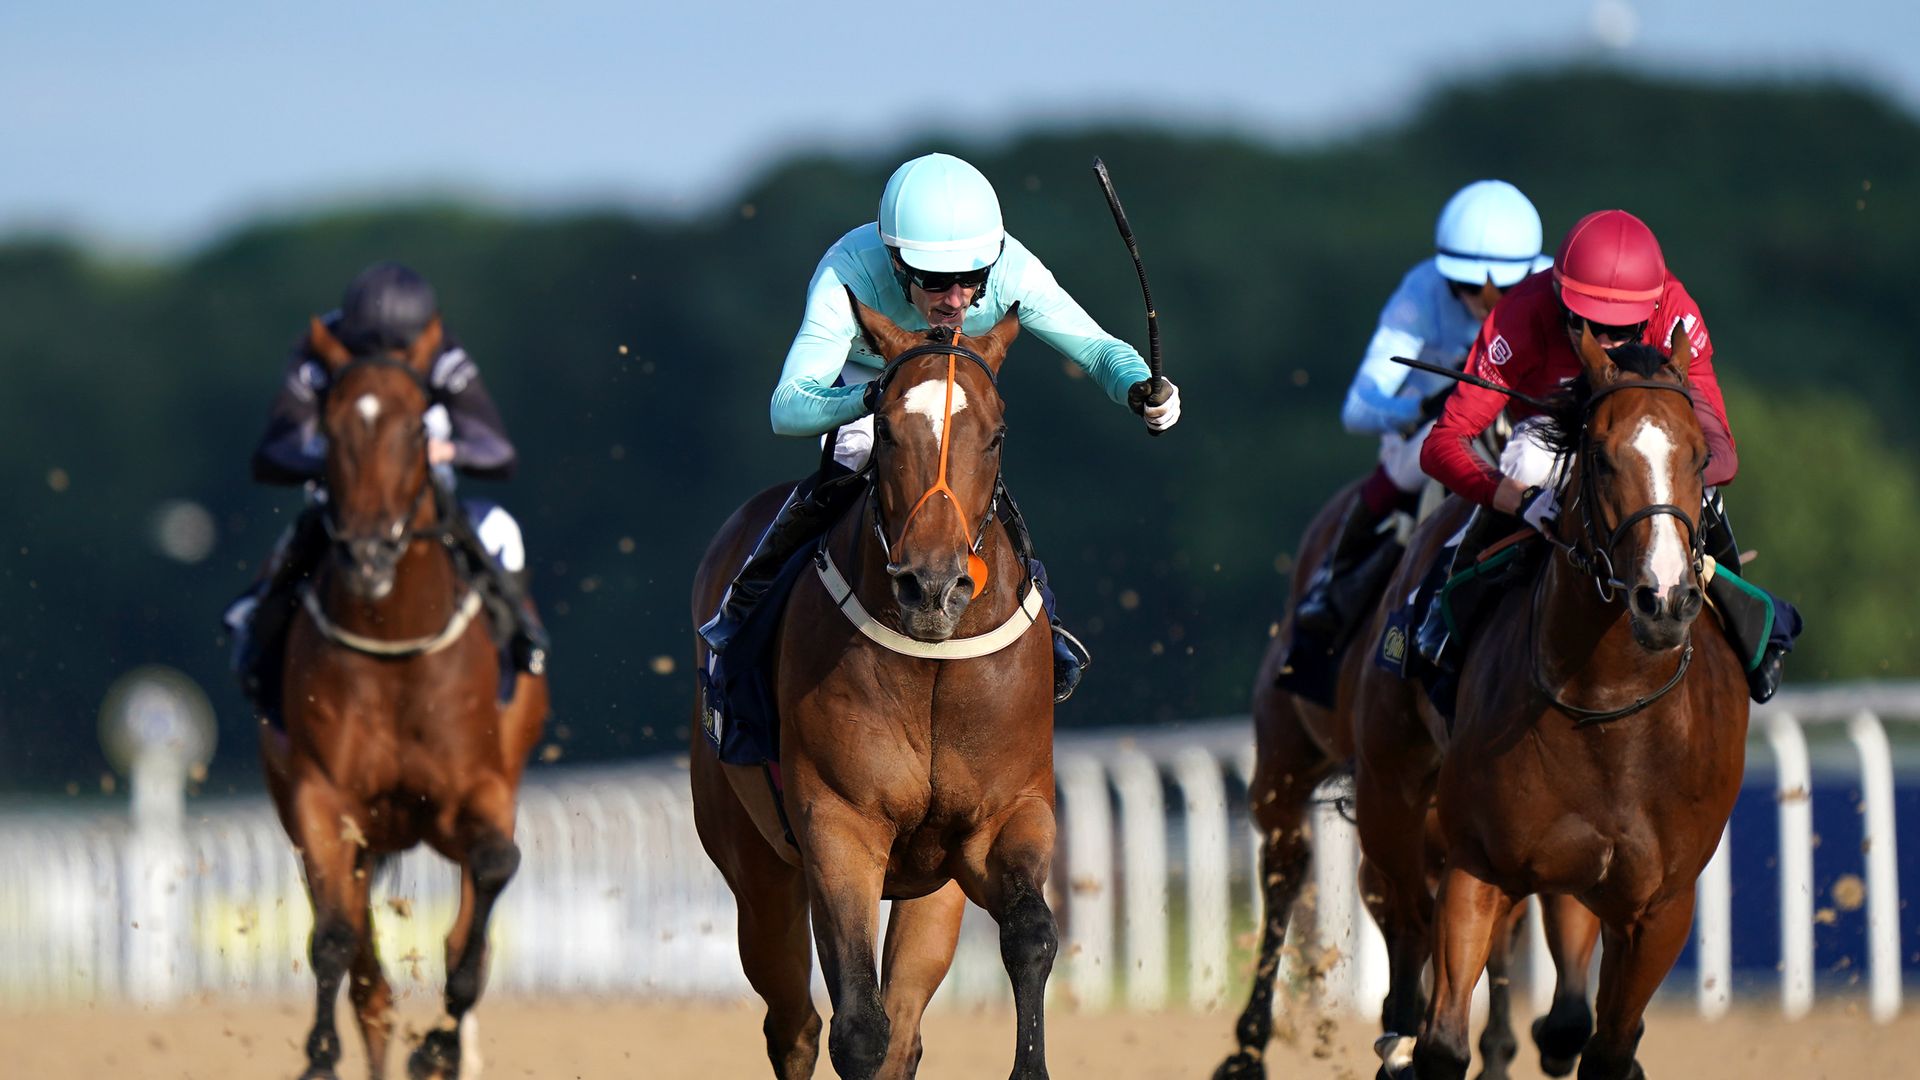 Newmarket Red lead talkSPORT after thrilling Racing League opener